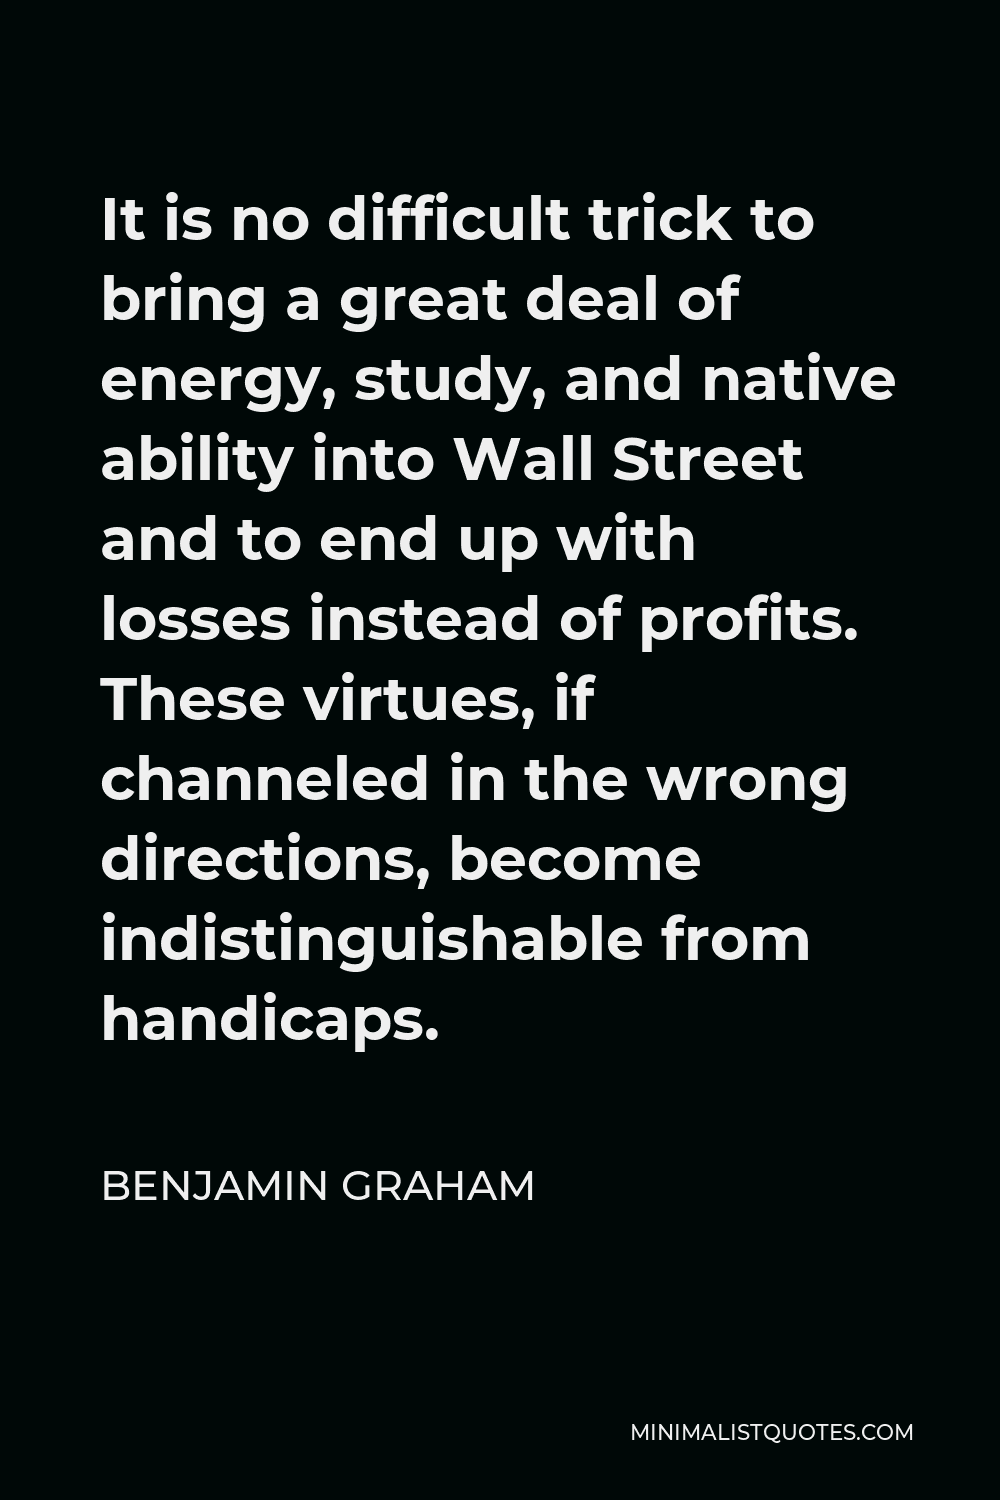 Benjamin Graham Quote - It is no difficult trick to bring a great deal of energy, study, and native ability into Wall Street and to end up with losses instead of profits. These virtues, if channeled in the wrong directions, become indistinguishable from handicaps.